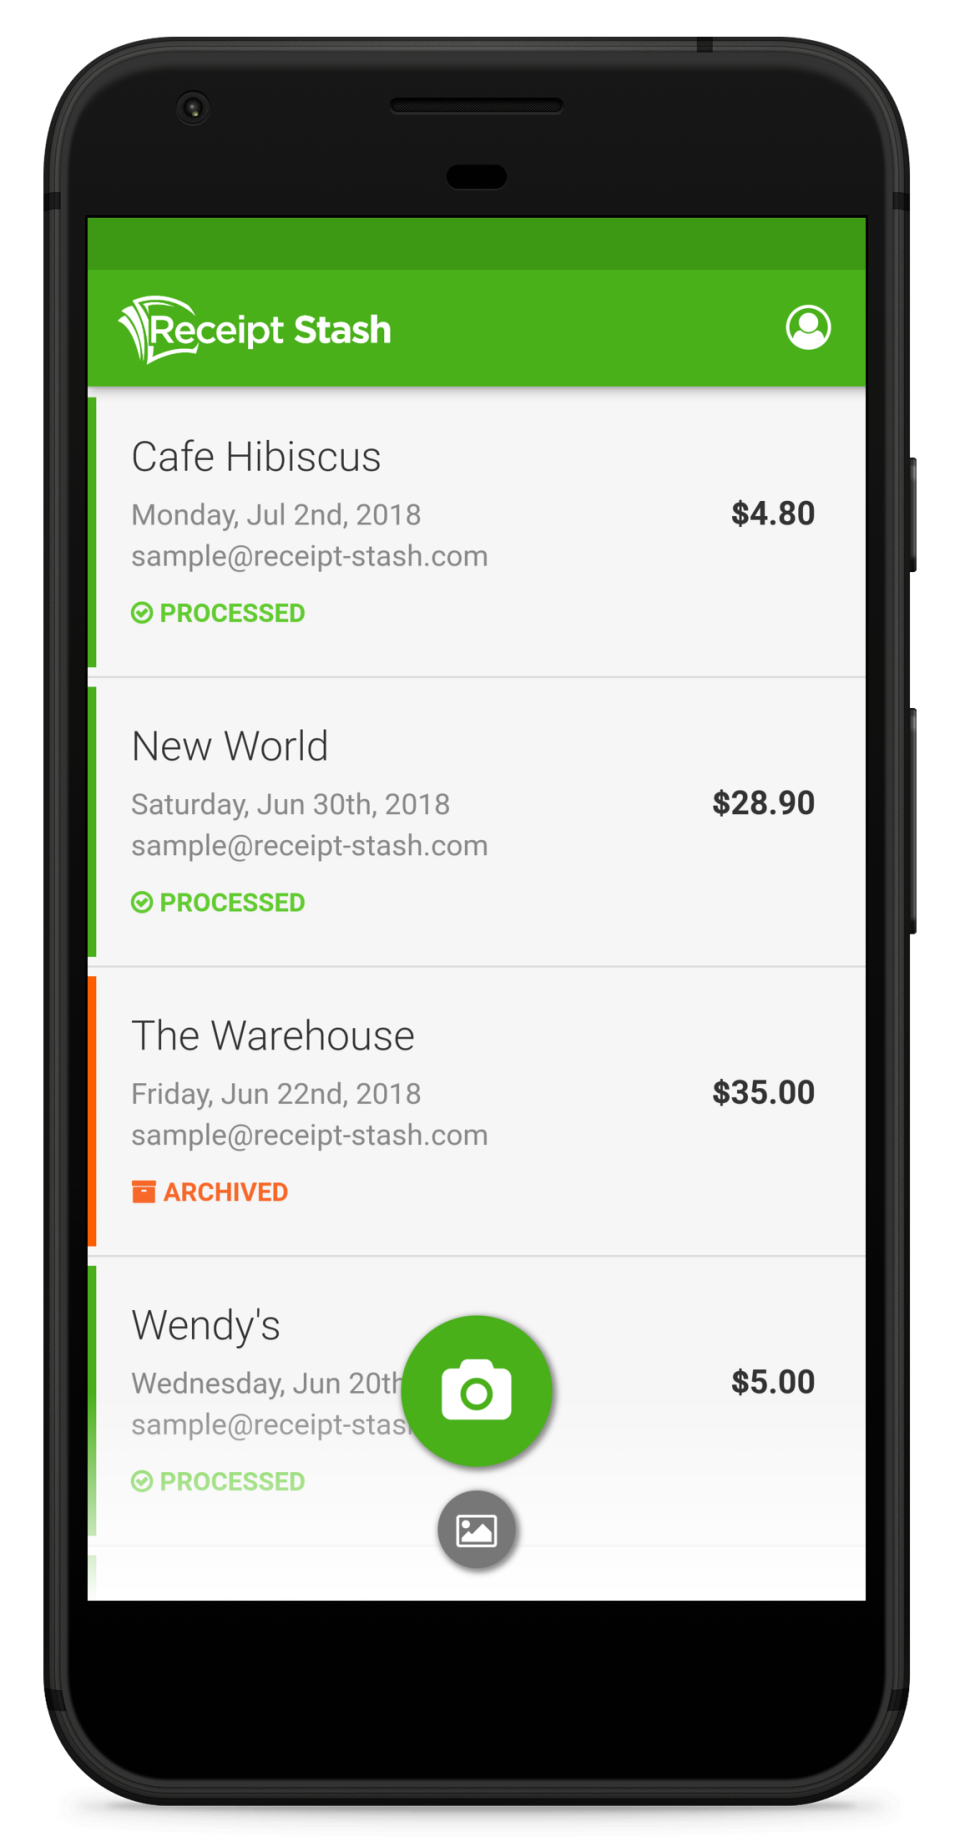 Receipt Stash Software - Expenses can be processed and archived